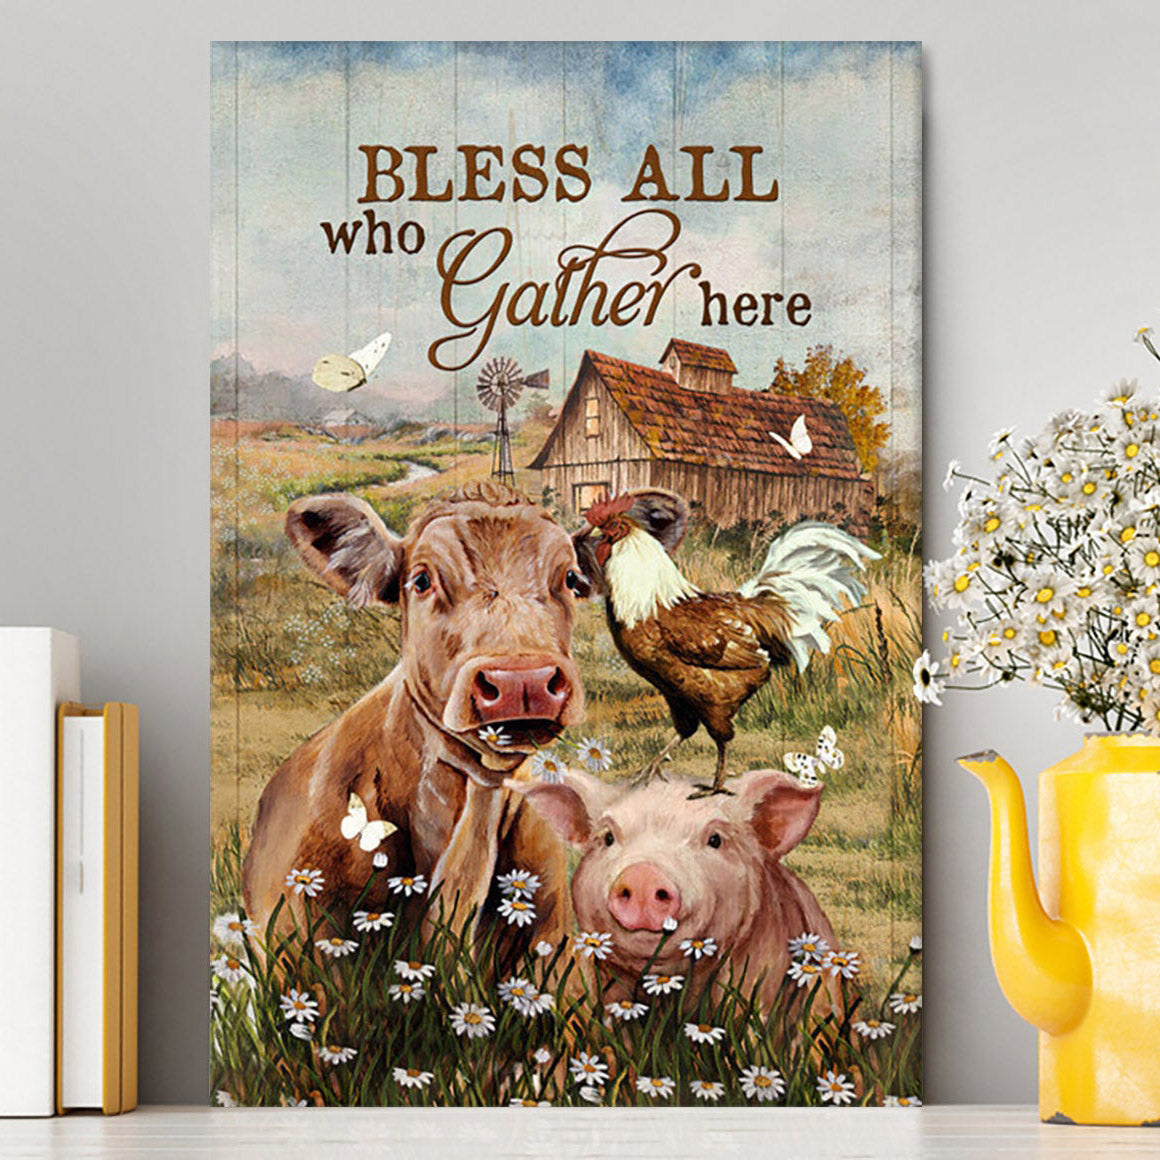 Bless All Who Gather Here Canvas - Animal Daisy Field Rooster Canvas Wall Art - Christian Canvas Prints - Bible Verse Canvas Art